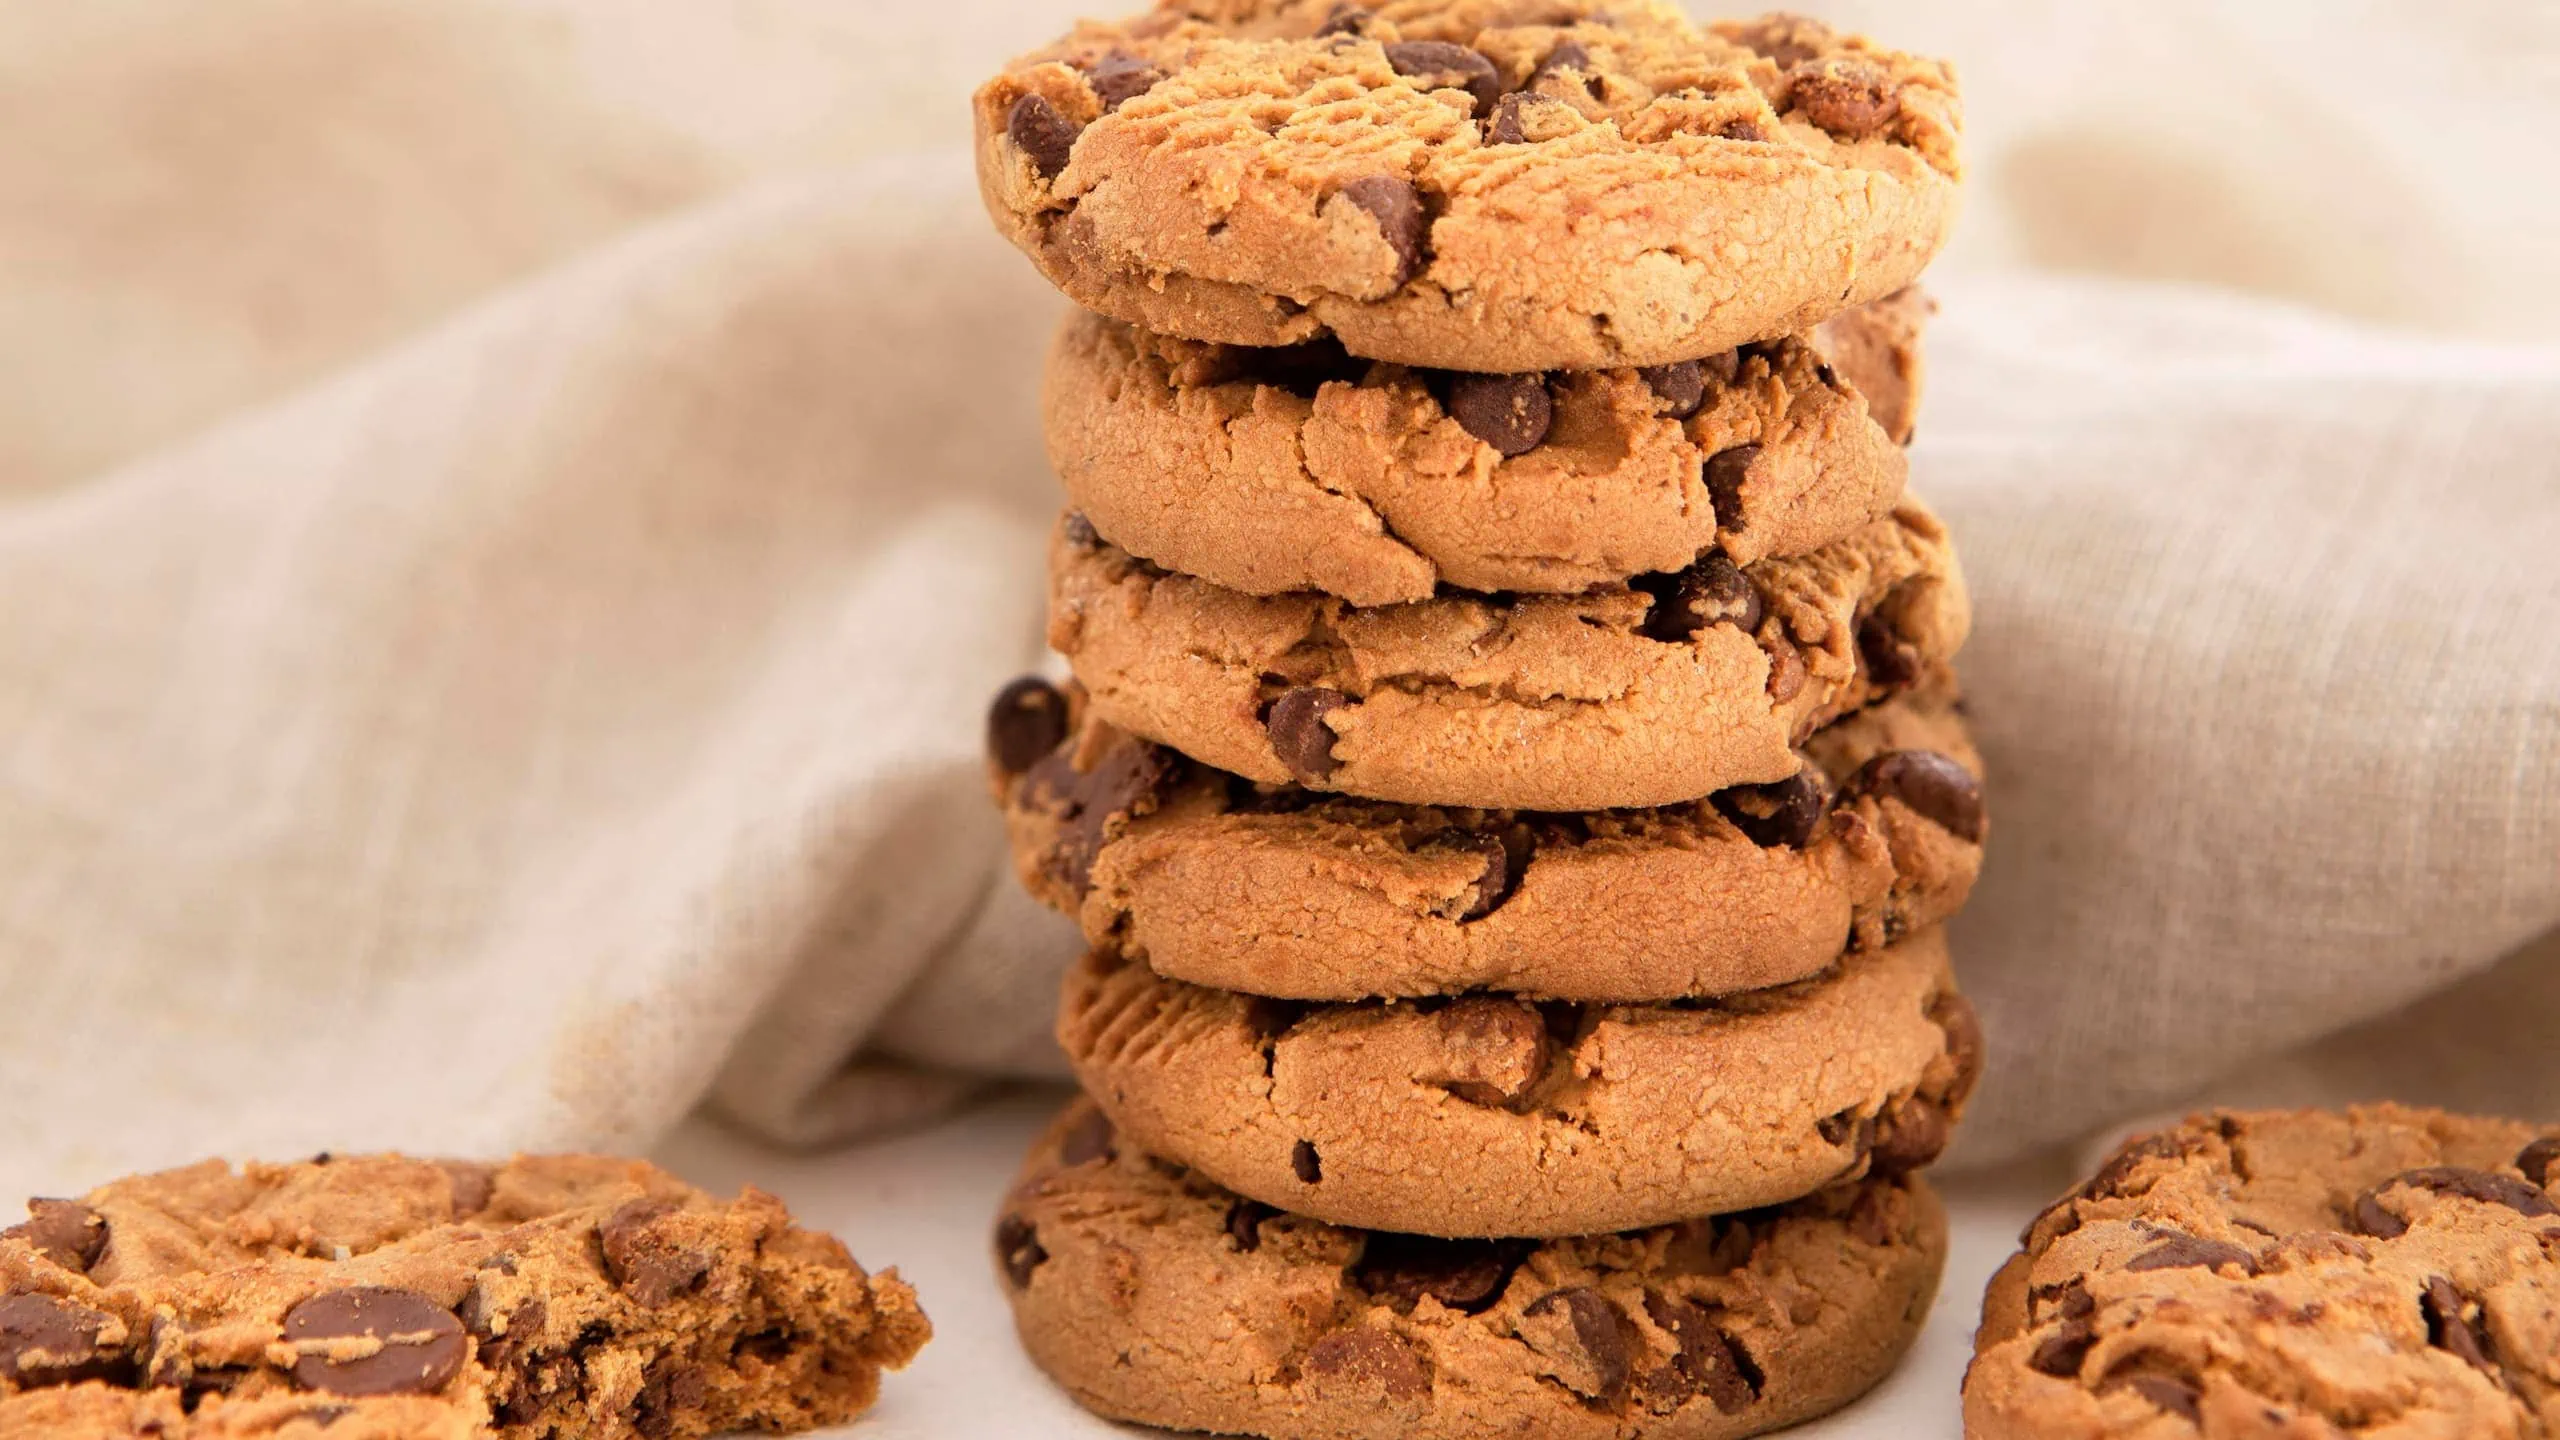 Our version of Kirkland's chocolate chip cookie recipe